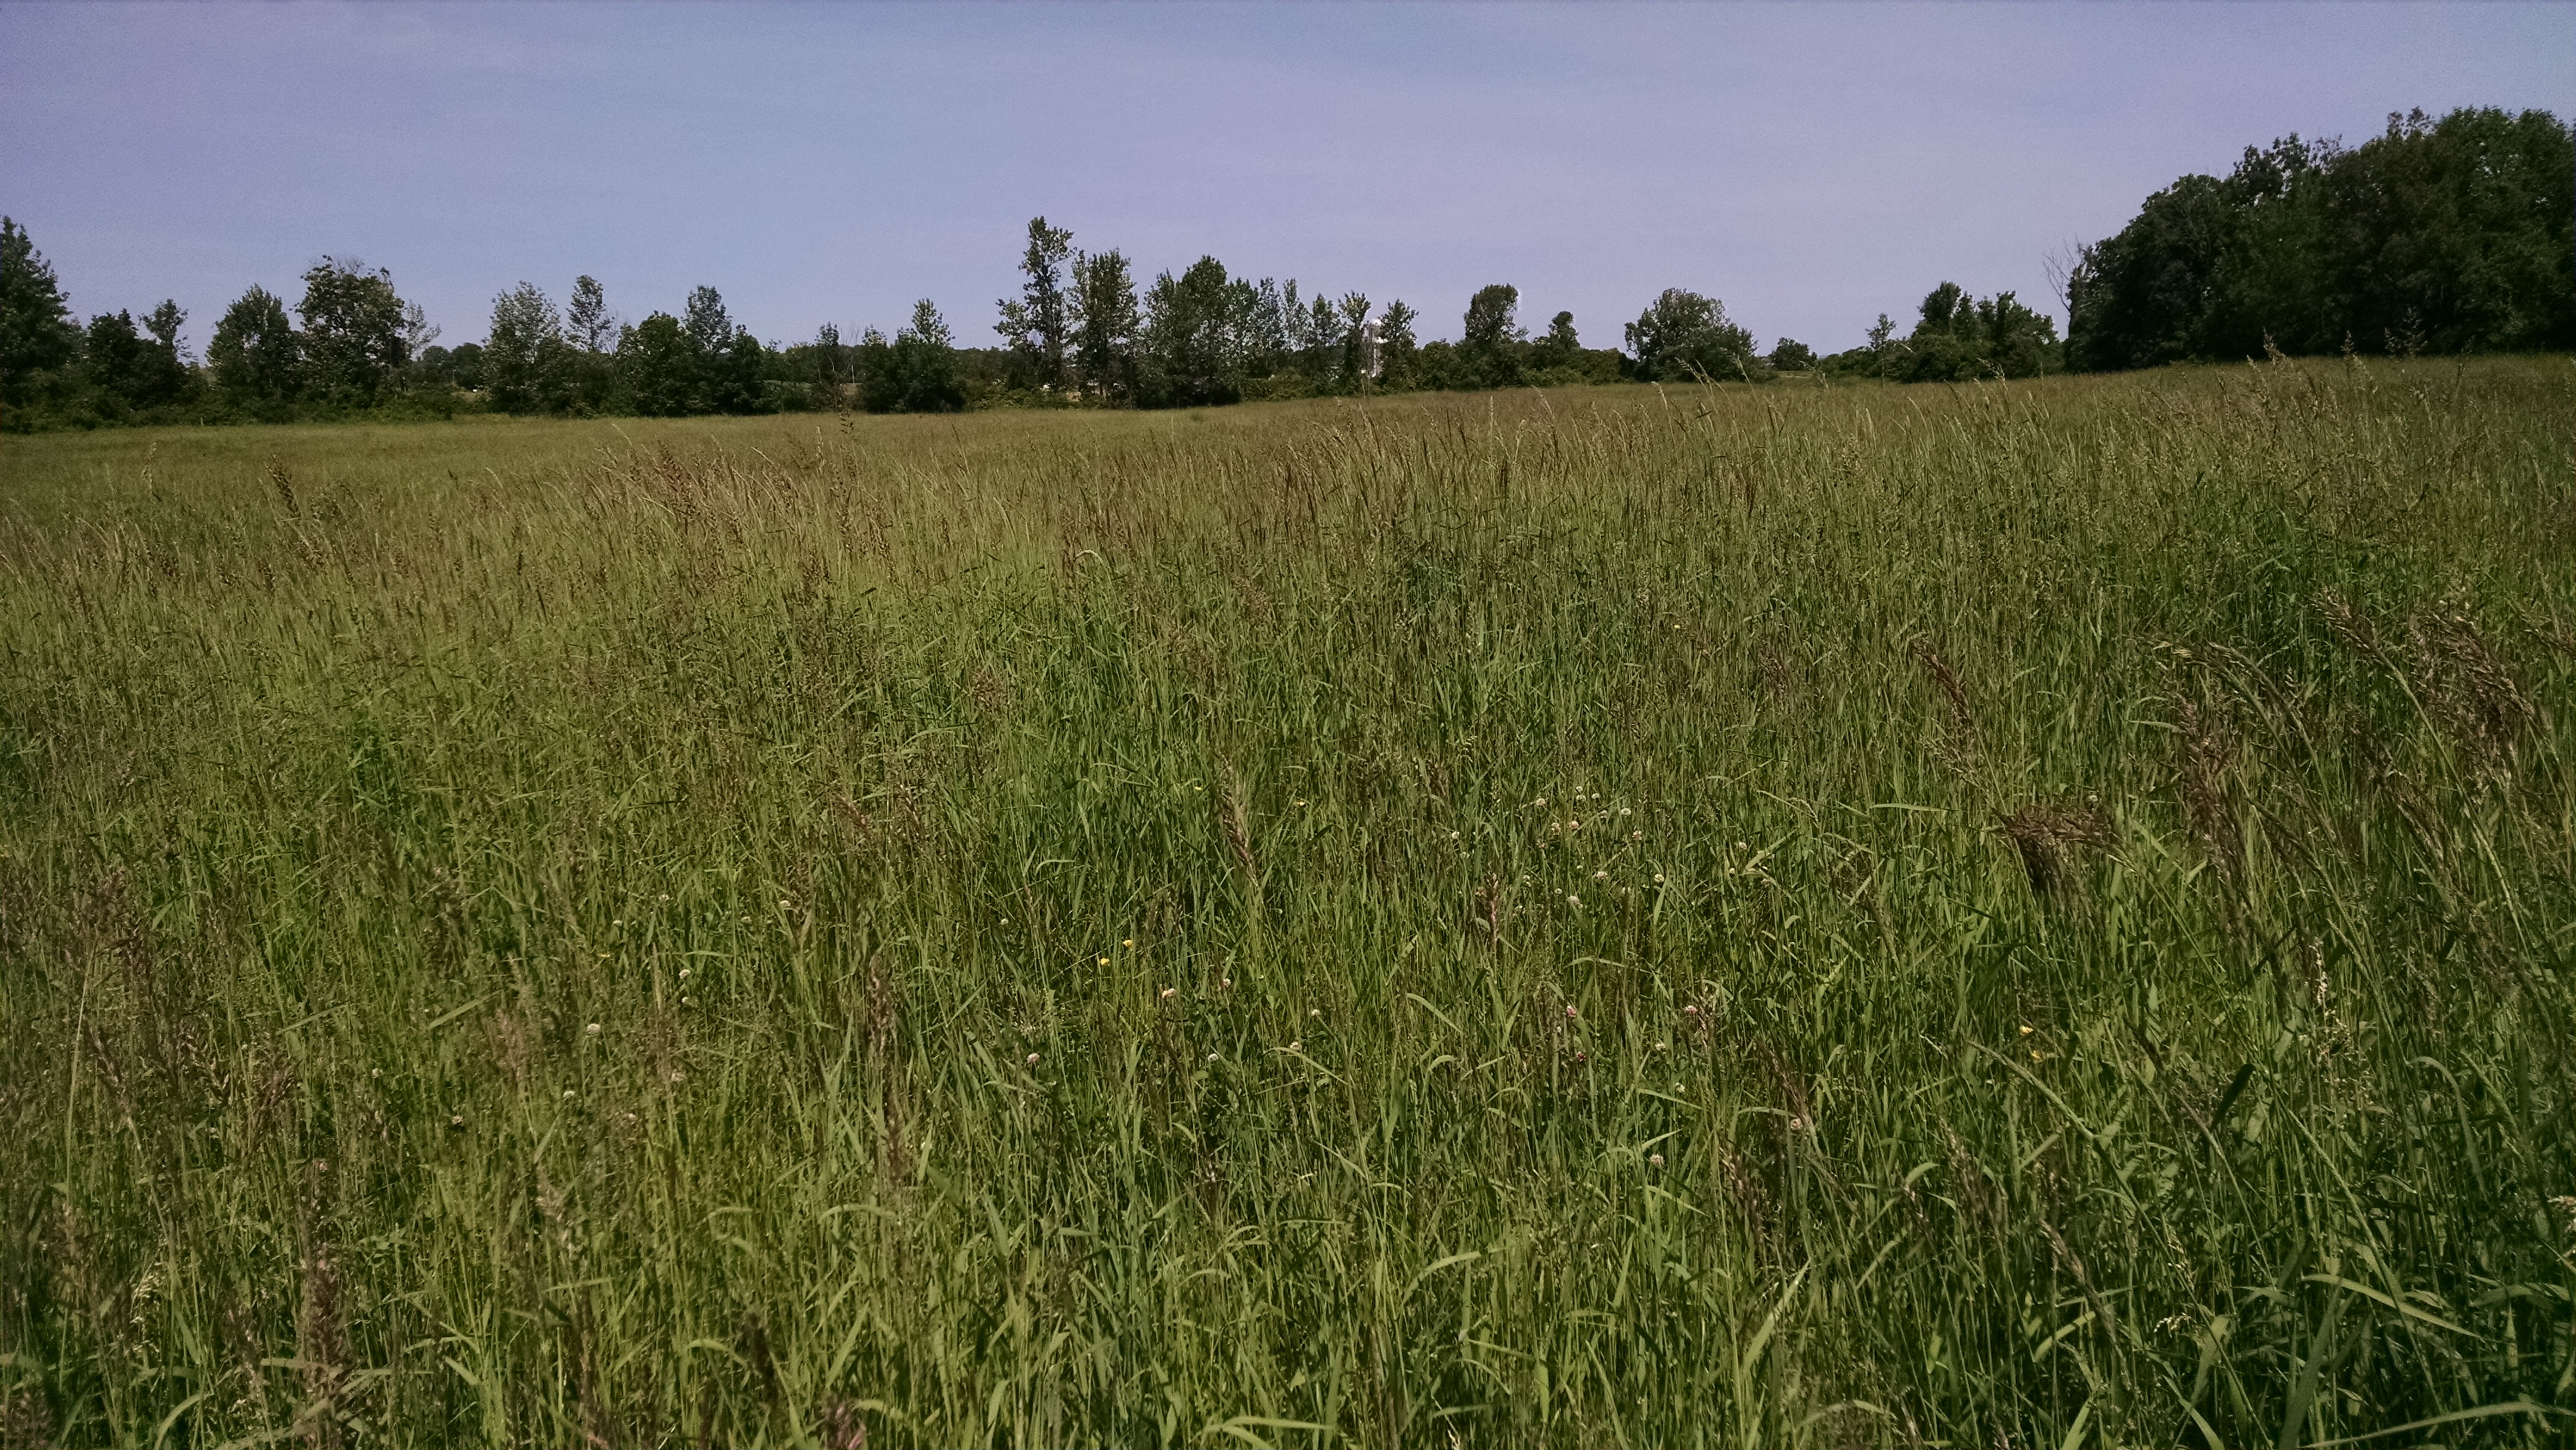 Here's the half of the field we grazed last year.  There are still undesirably species out there, but the grass beautiful.